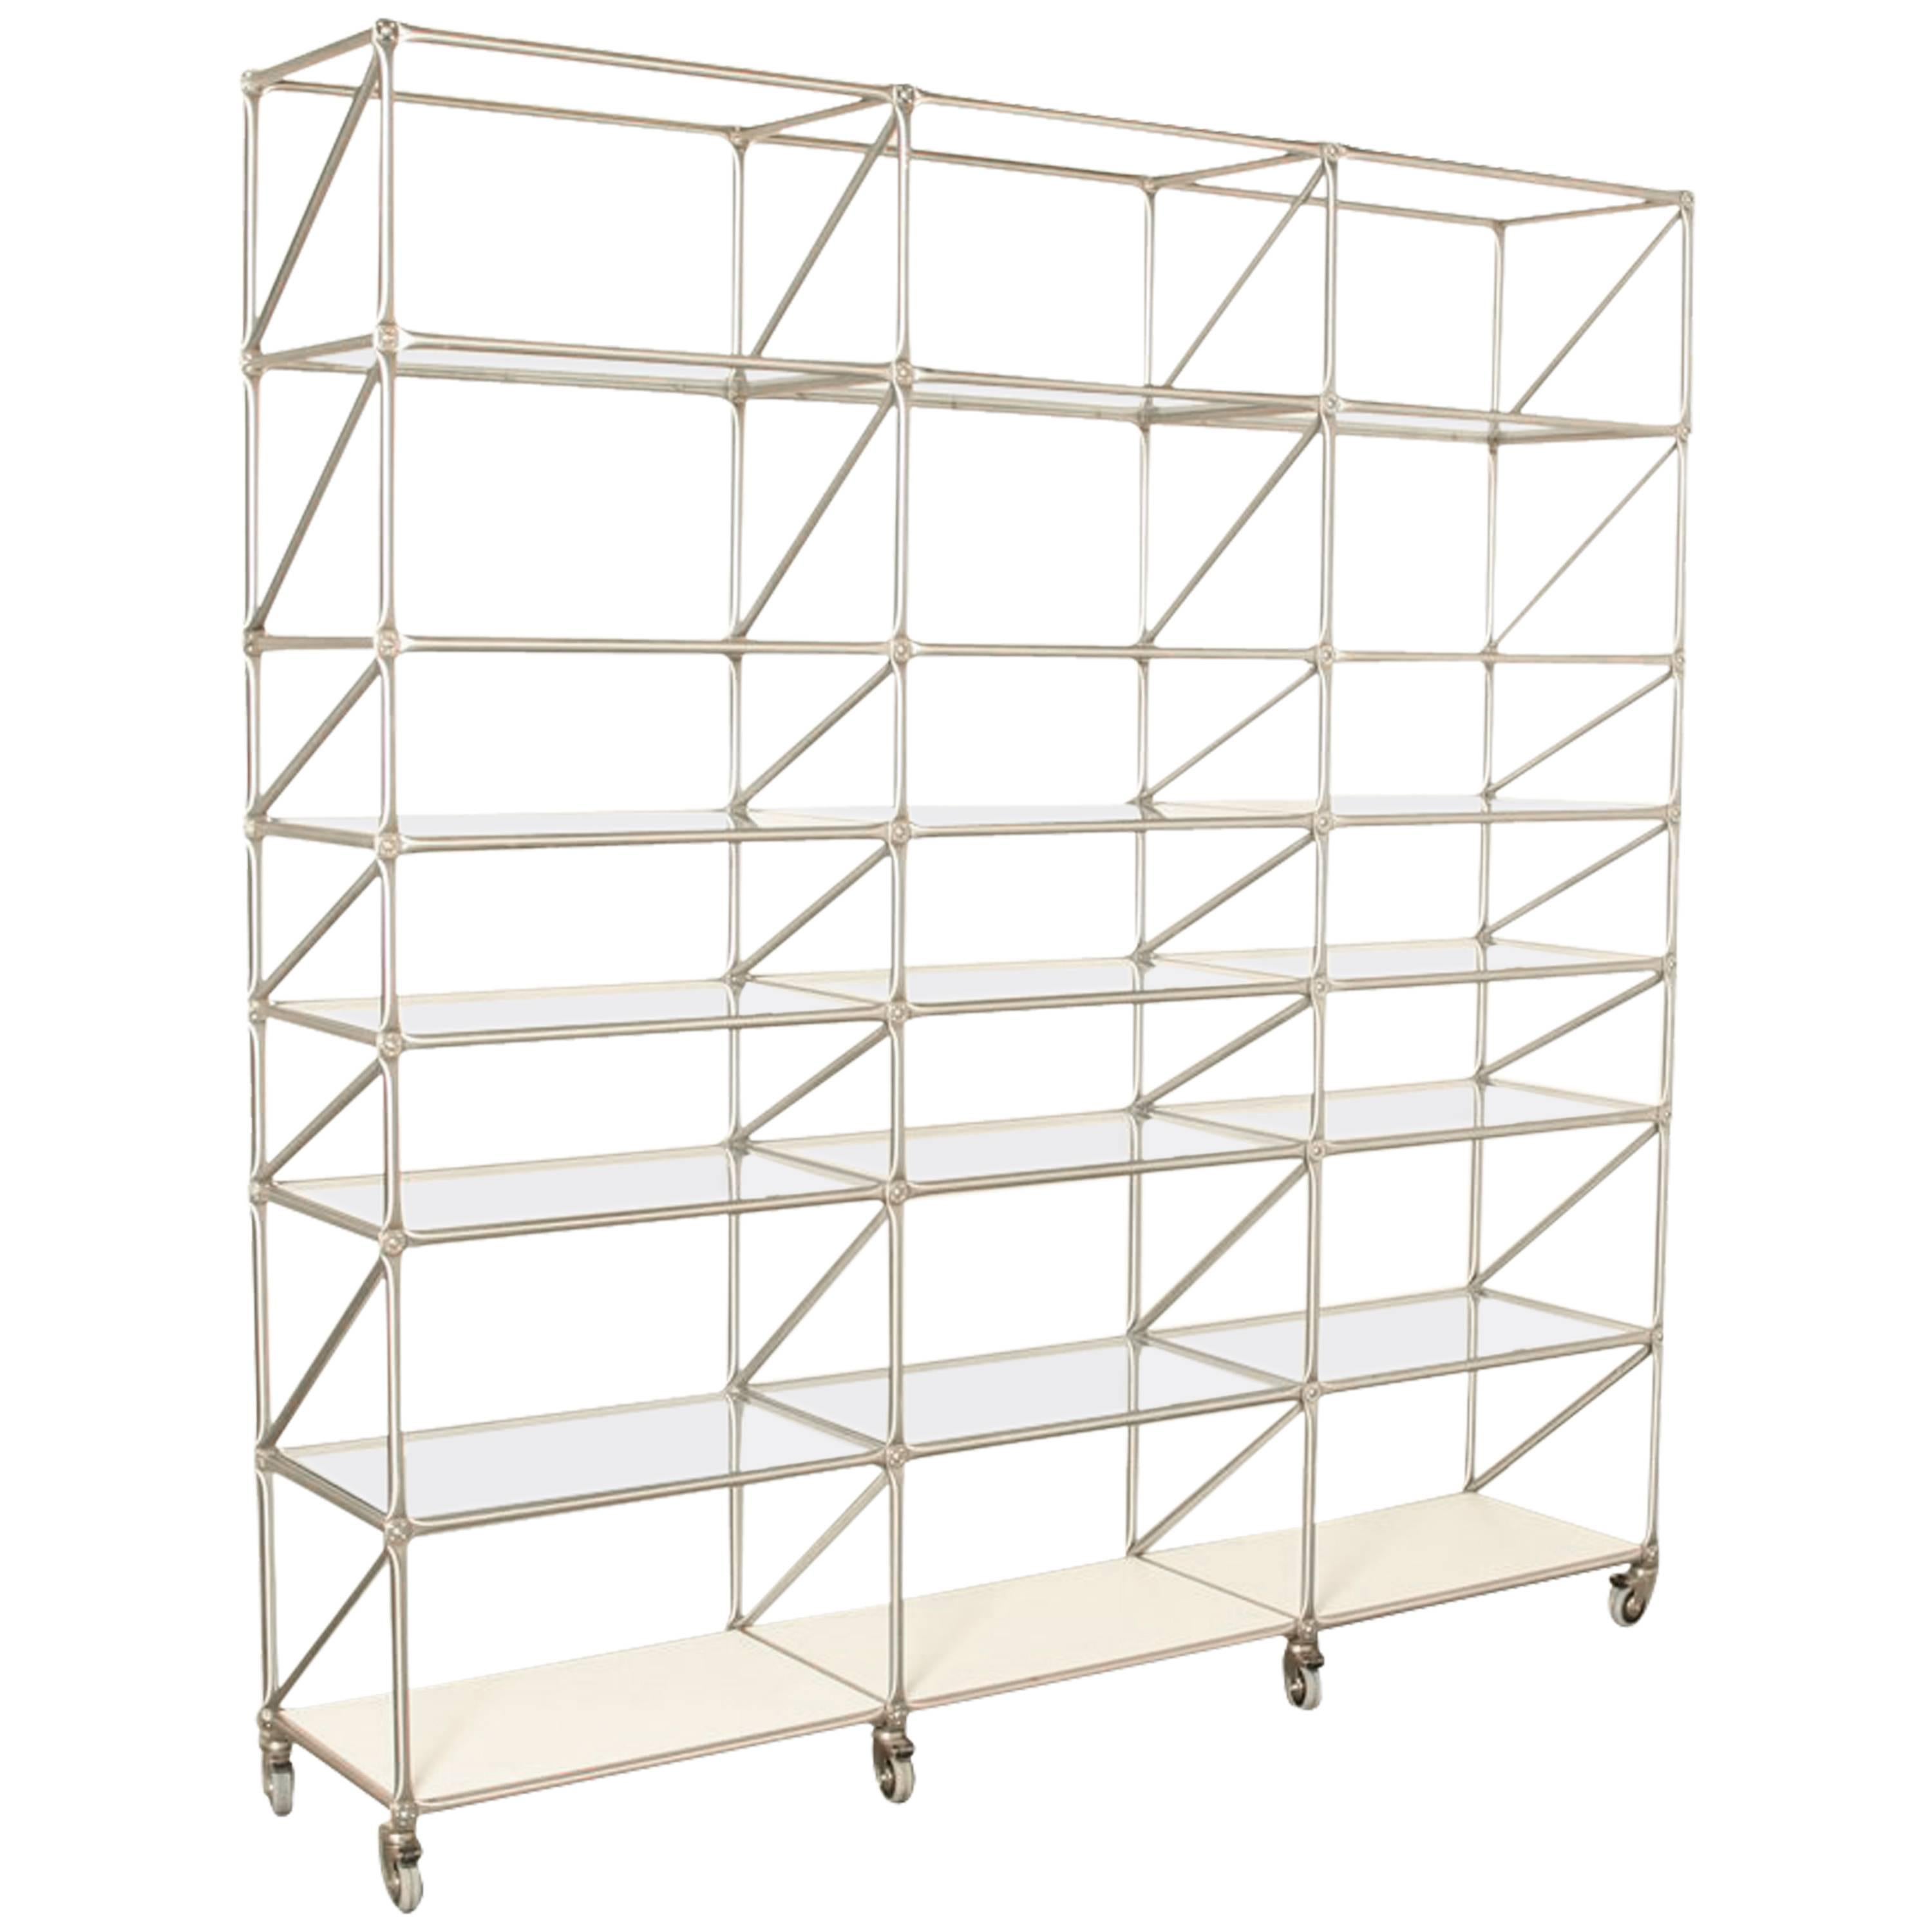 Regal Shelving Uint, Steel-Line by System 180, Wide with Glass Shelves